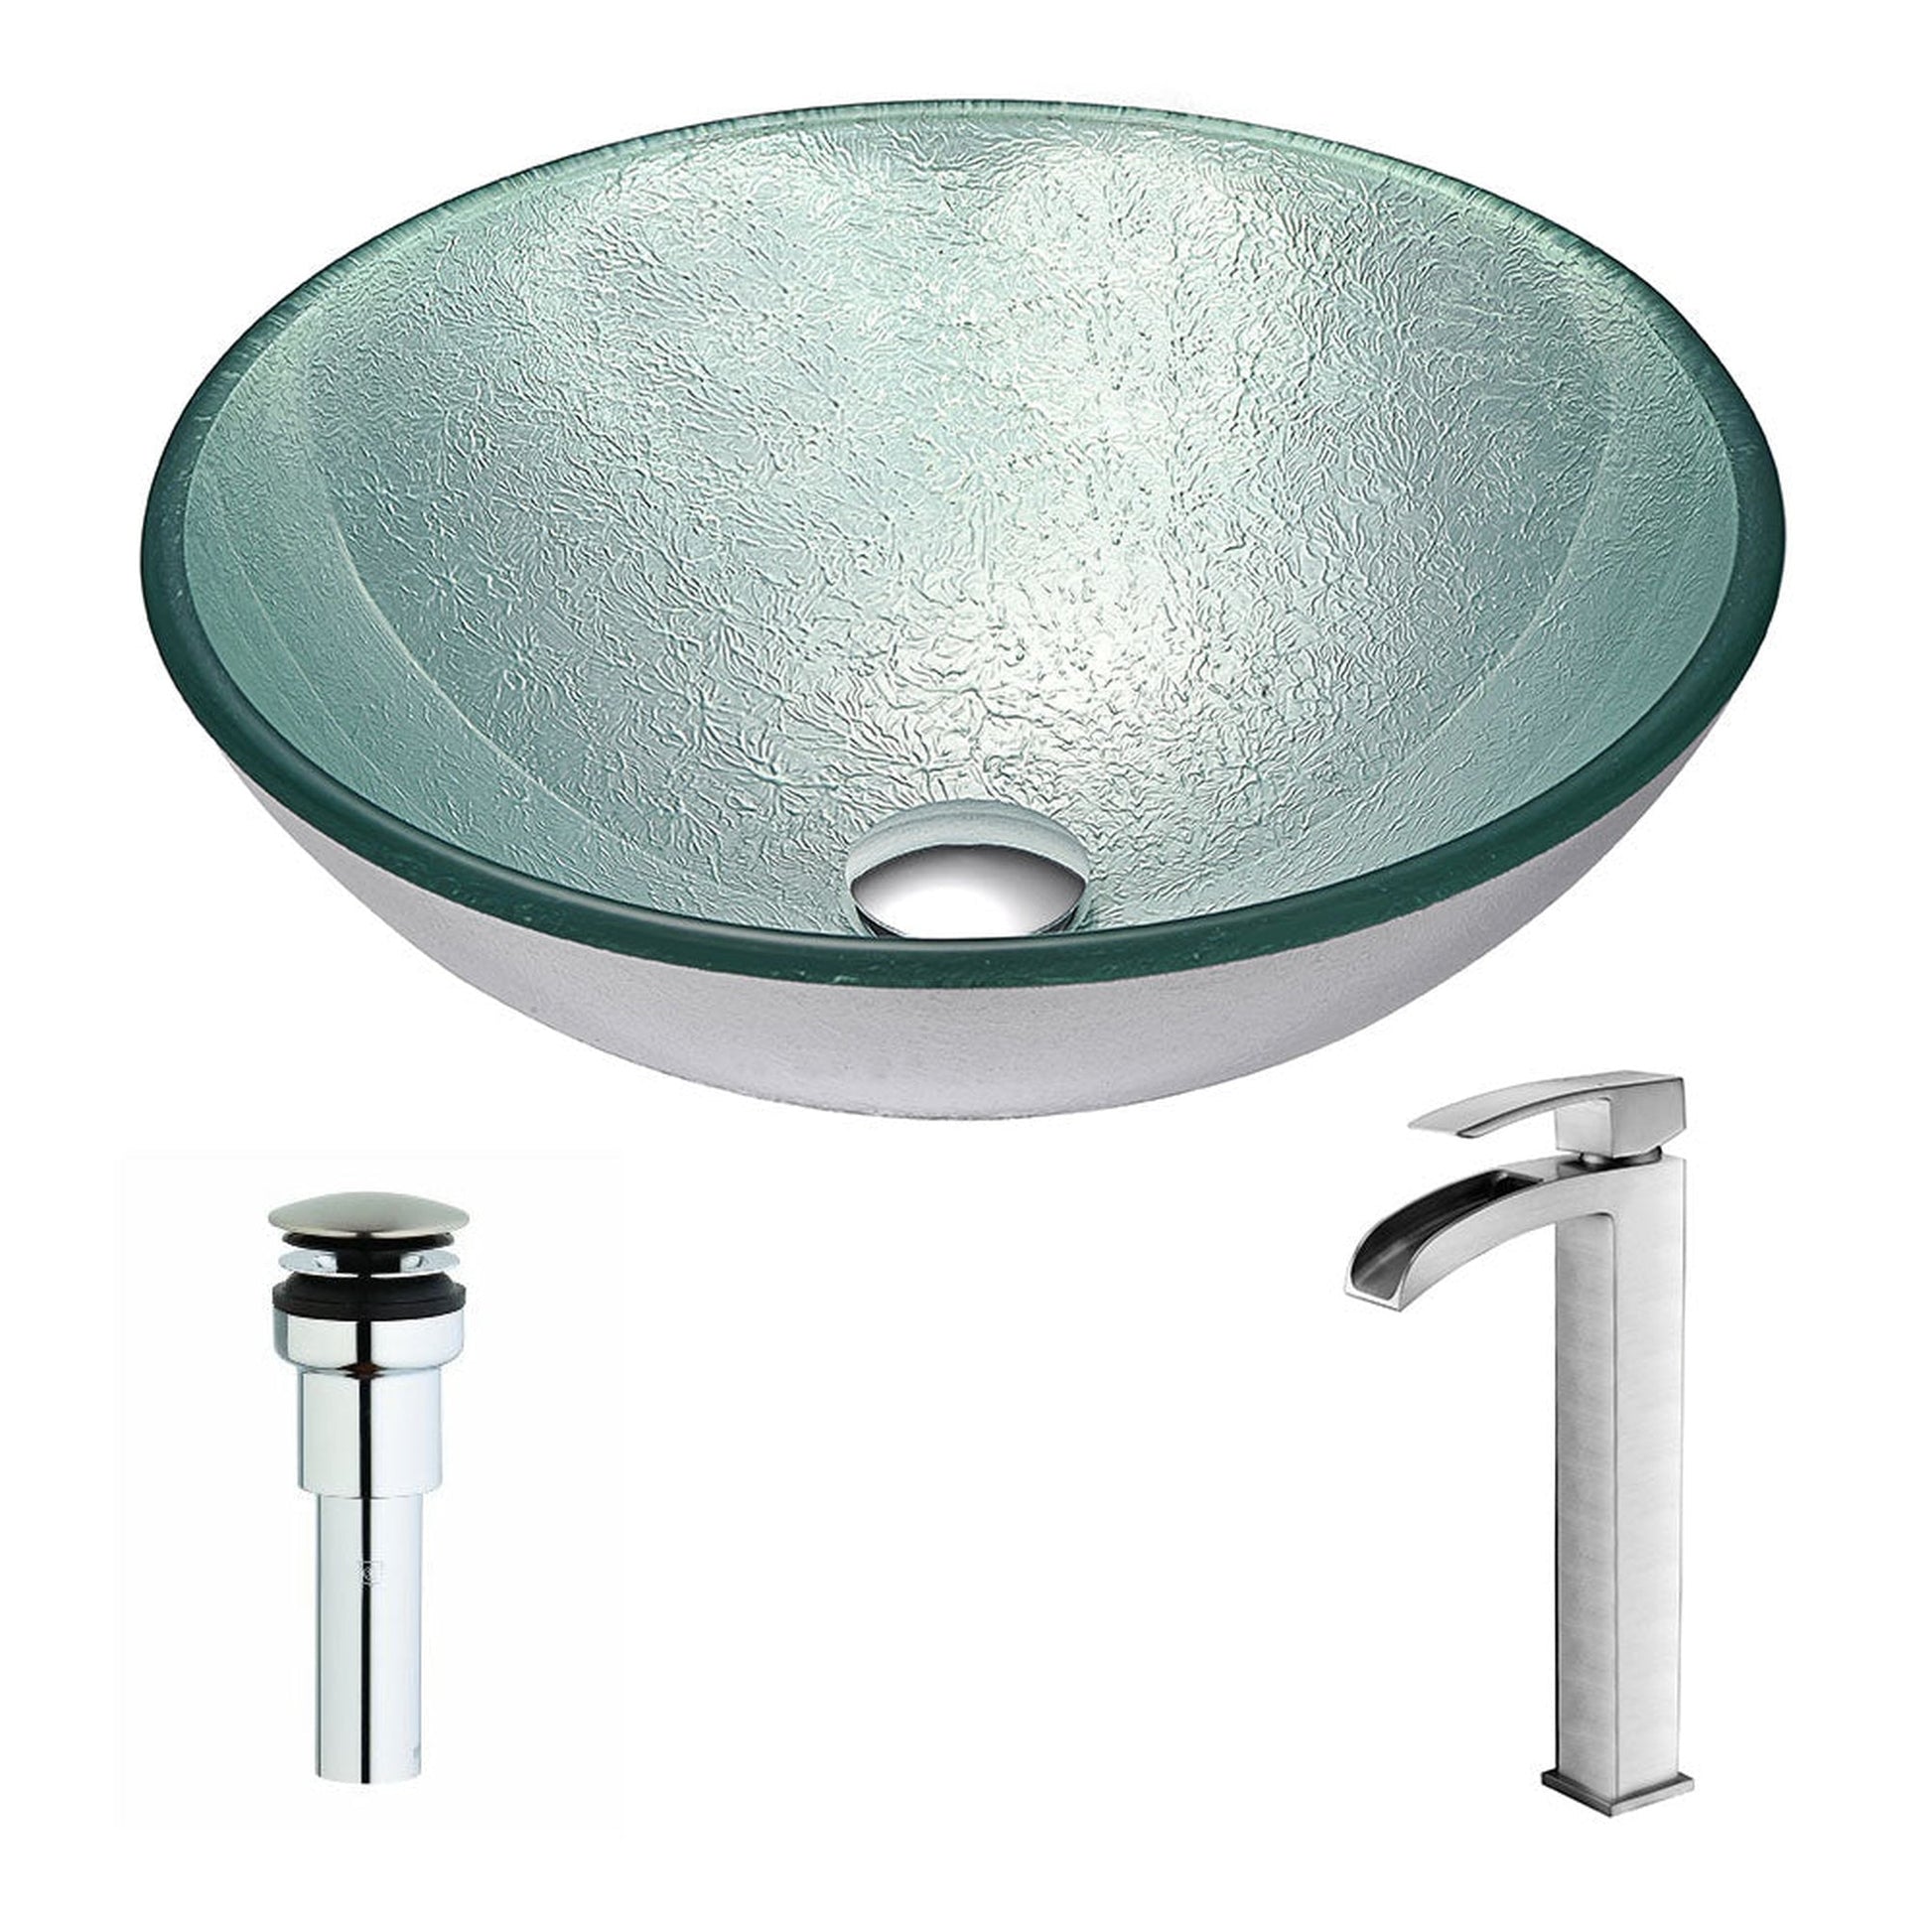 ANZZI Spirito Series 17" x 17" Round Churning Silver Deco-Glass Vessel Sink With Chrome Pop-Up Drain and Brushed Nickel Key Faucet